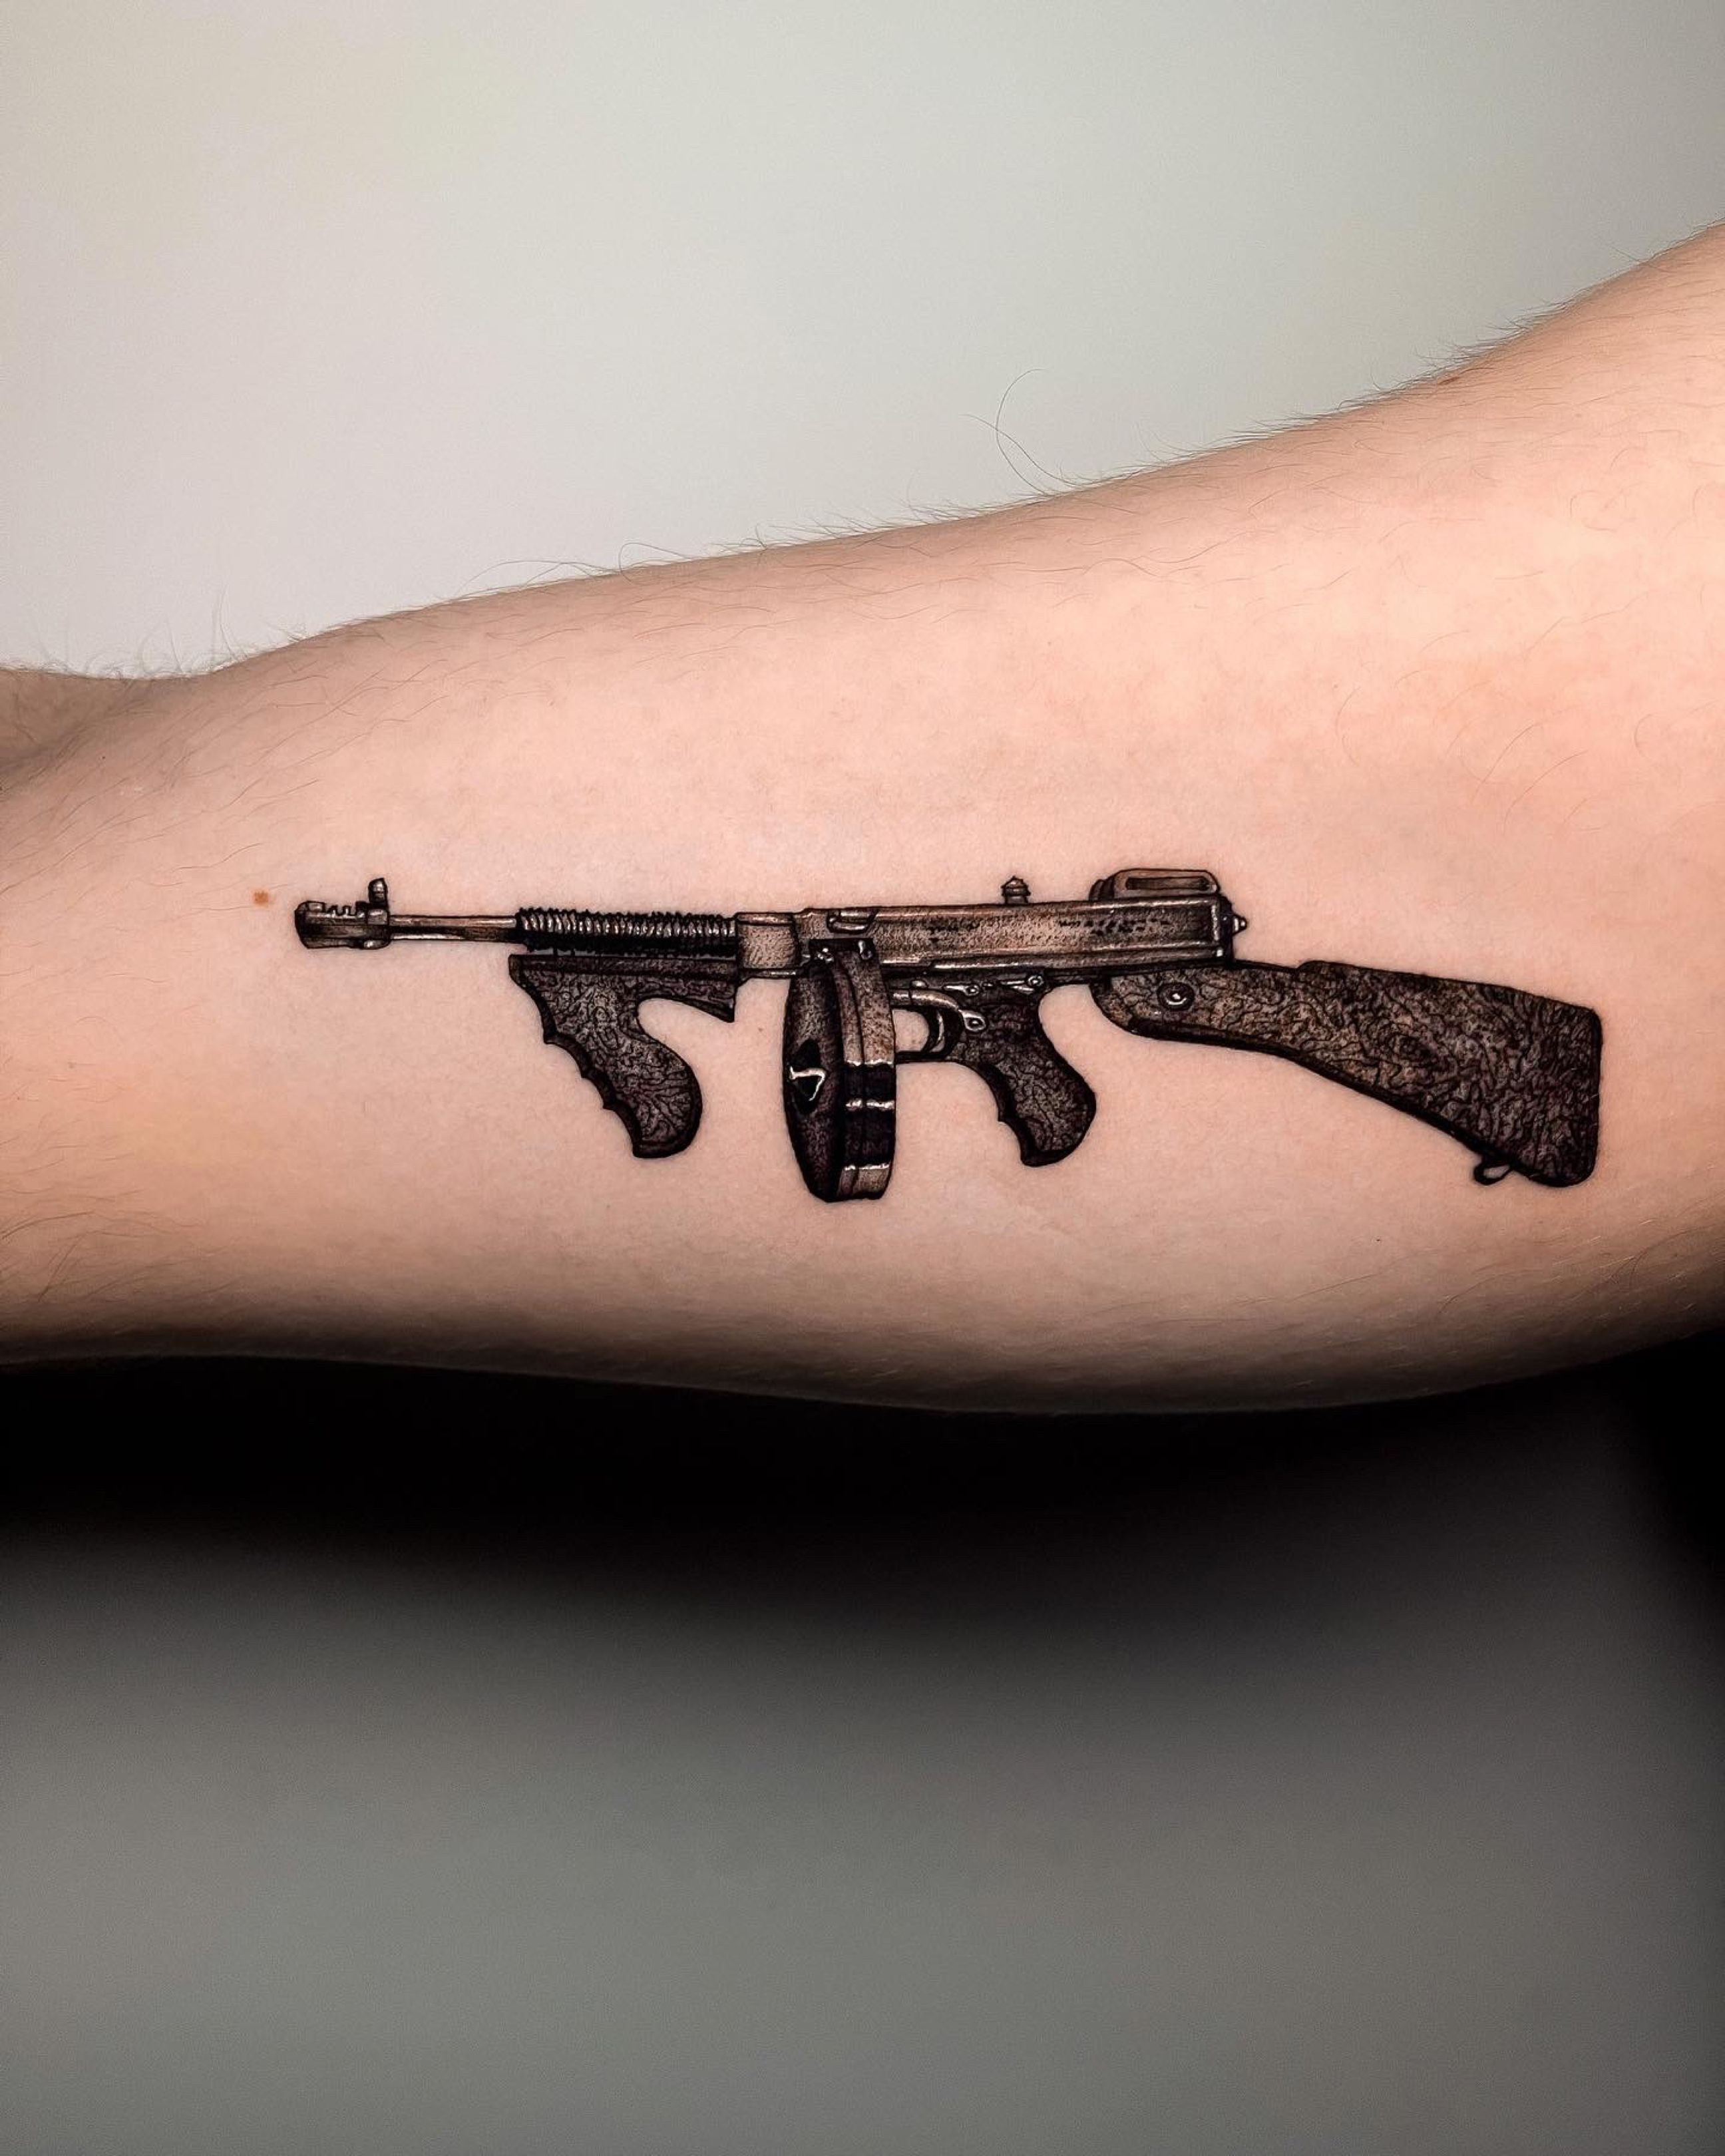 Marine Considered 'Unfit' to Re-Enlist Due to Rifle Tattoo